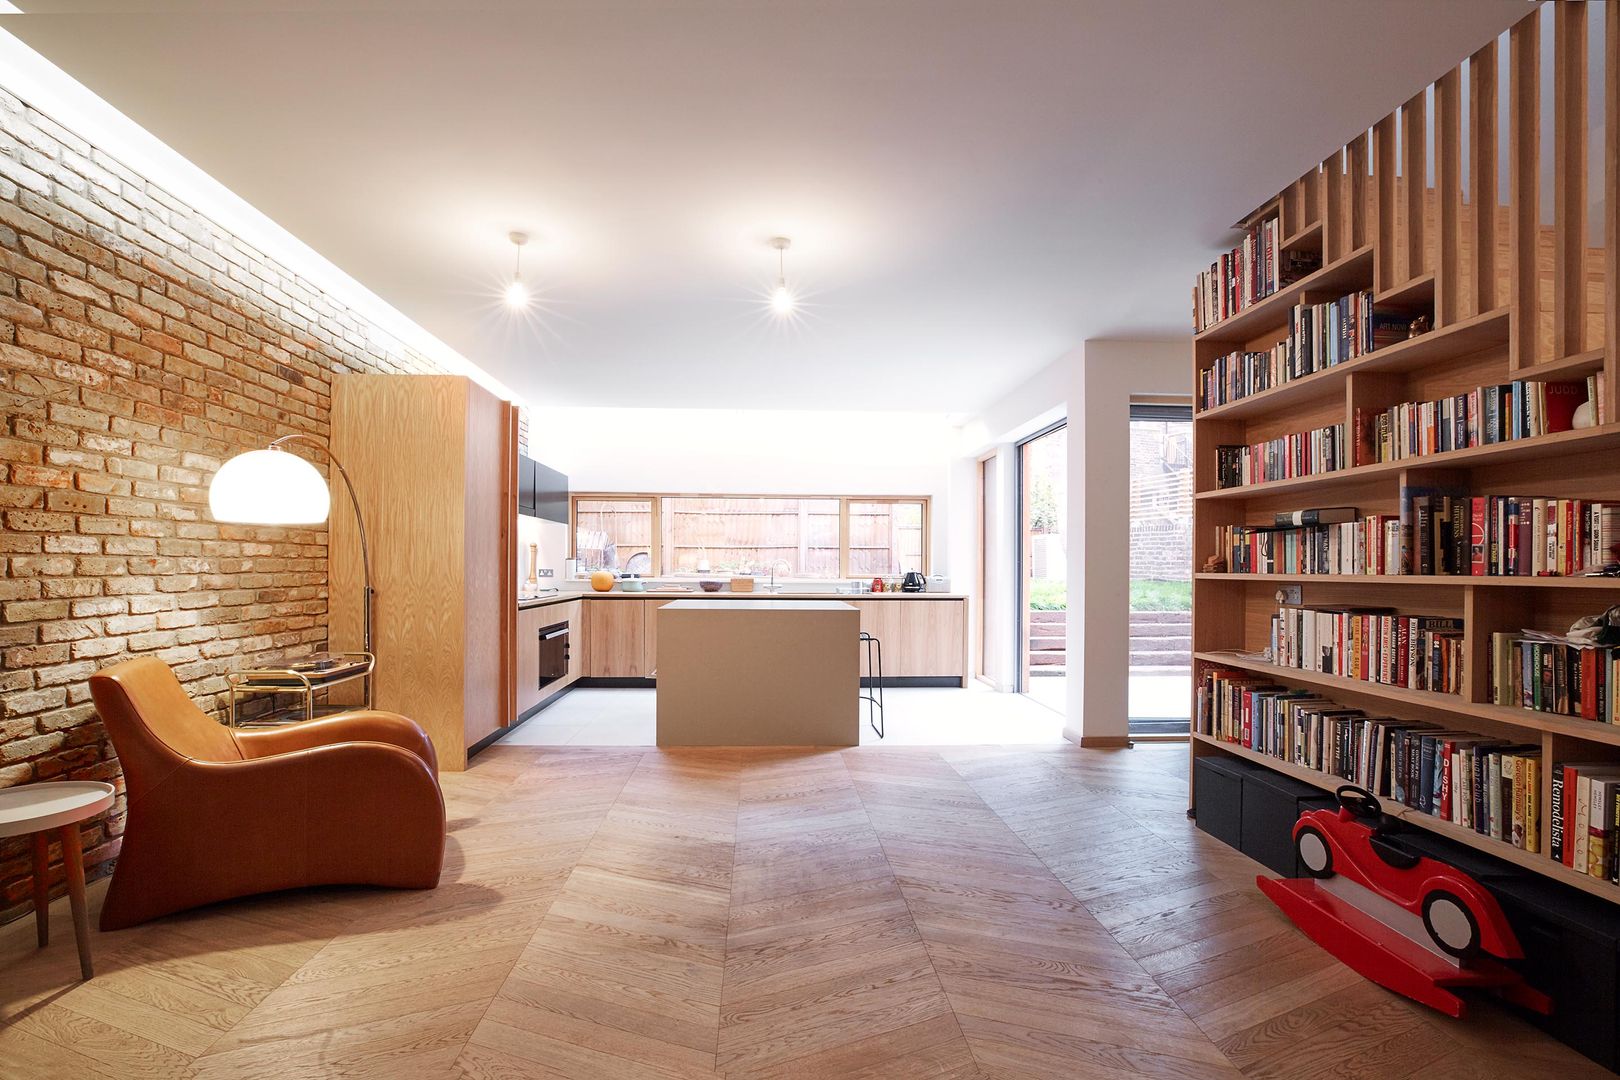 Private Residence - Scoble Place, London Designcubed مطبخ lounge,kitchen